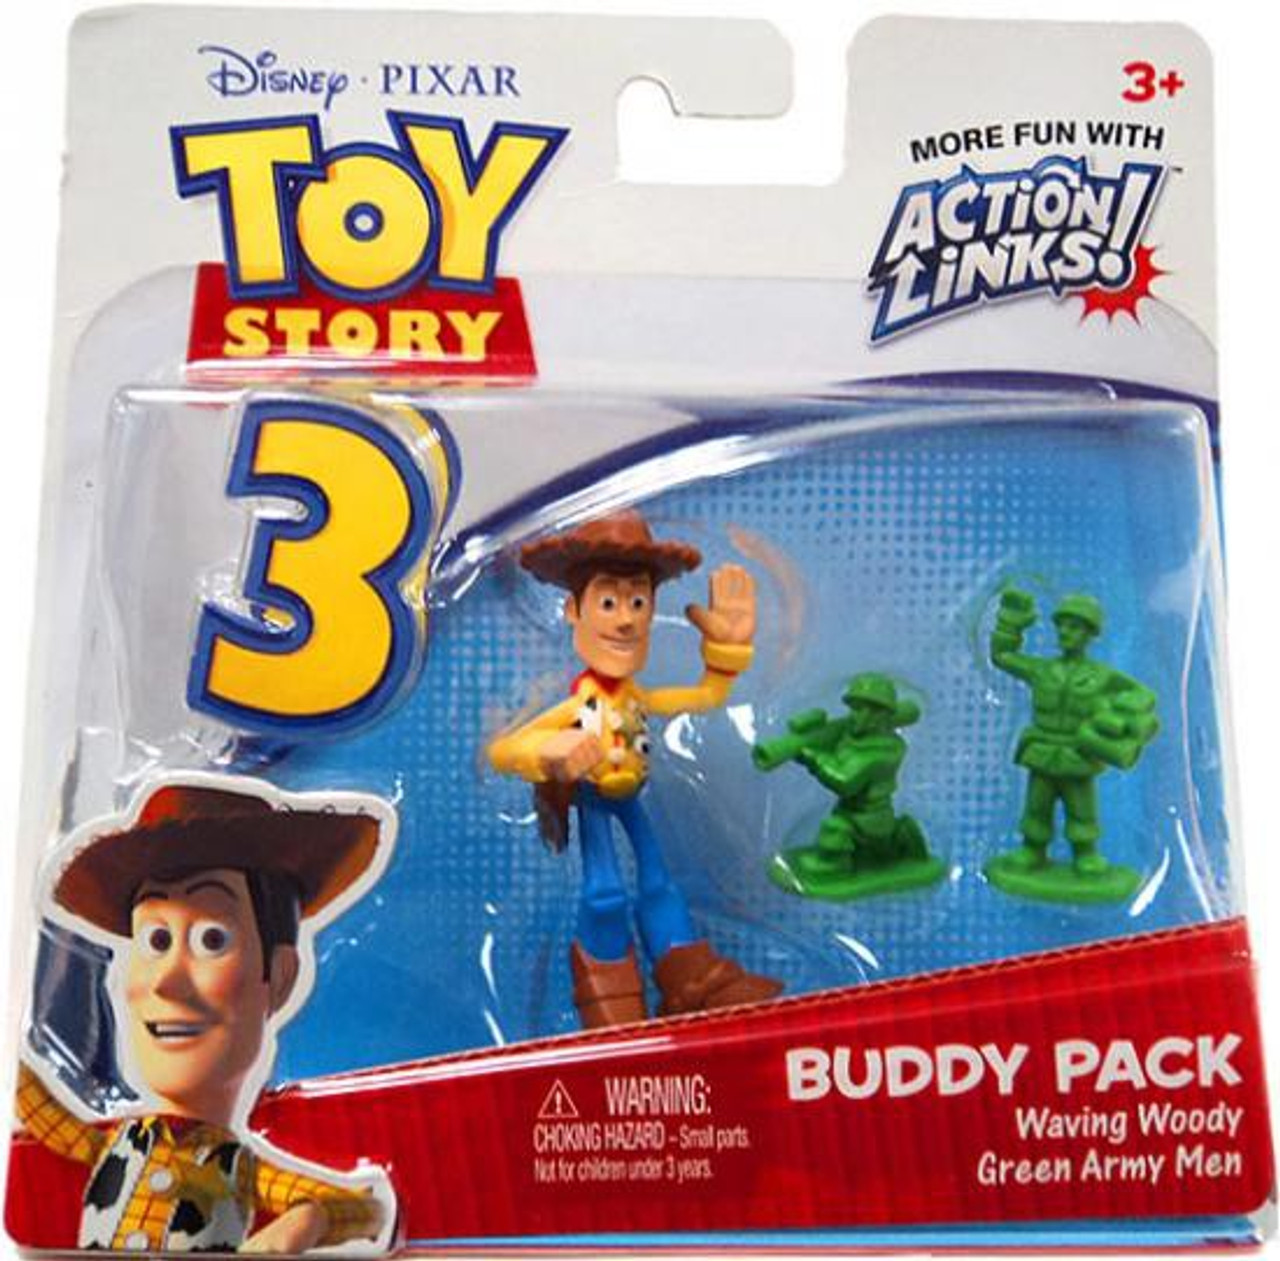 Toy Story 3 Action Links Buddy Pack Waving Woody Green Army Men Mini Figure 2 Pack Mattel Toys Toywiz - roblox army toys